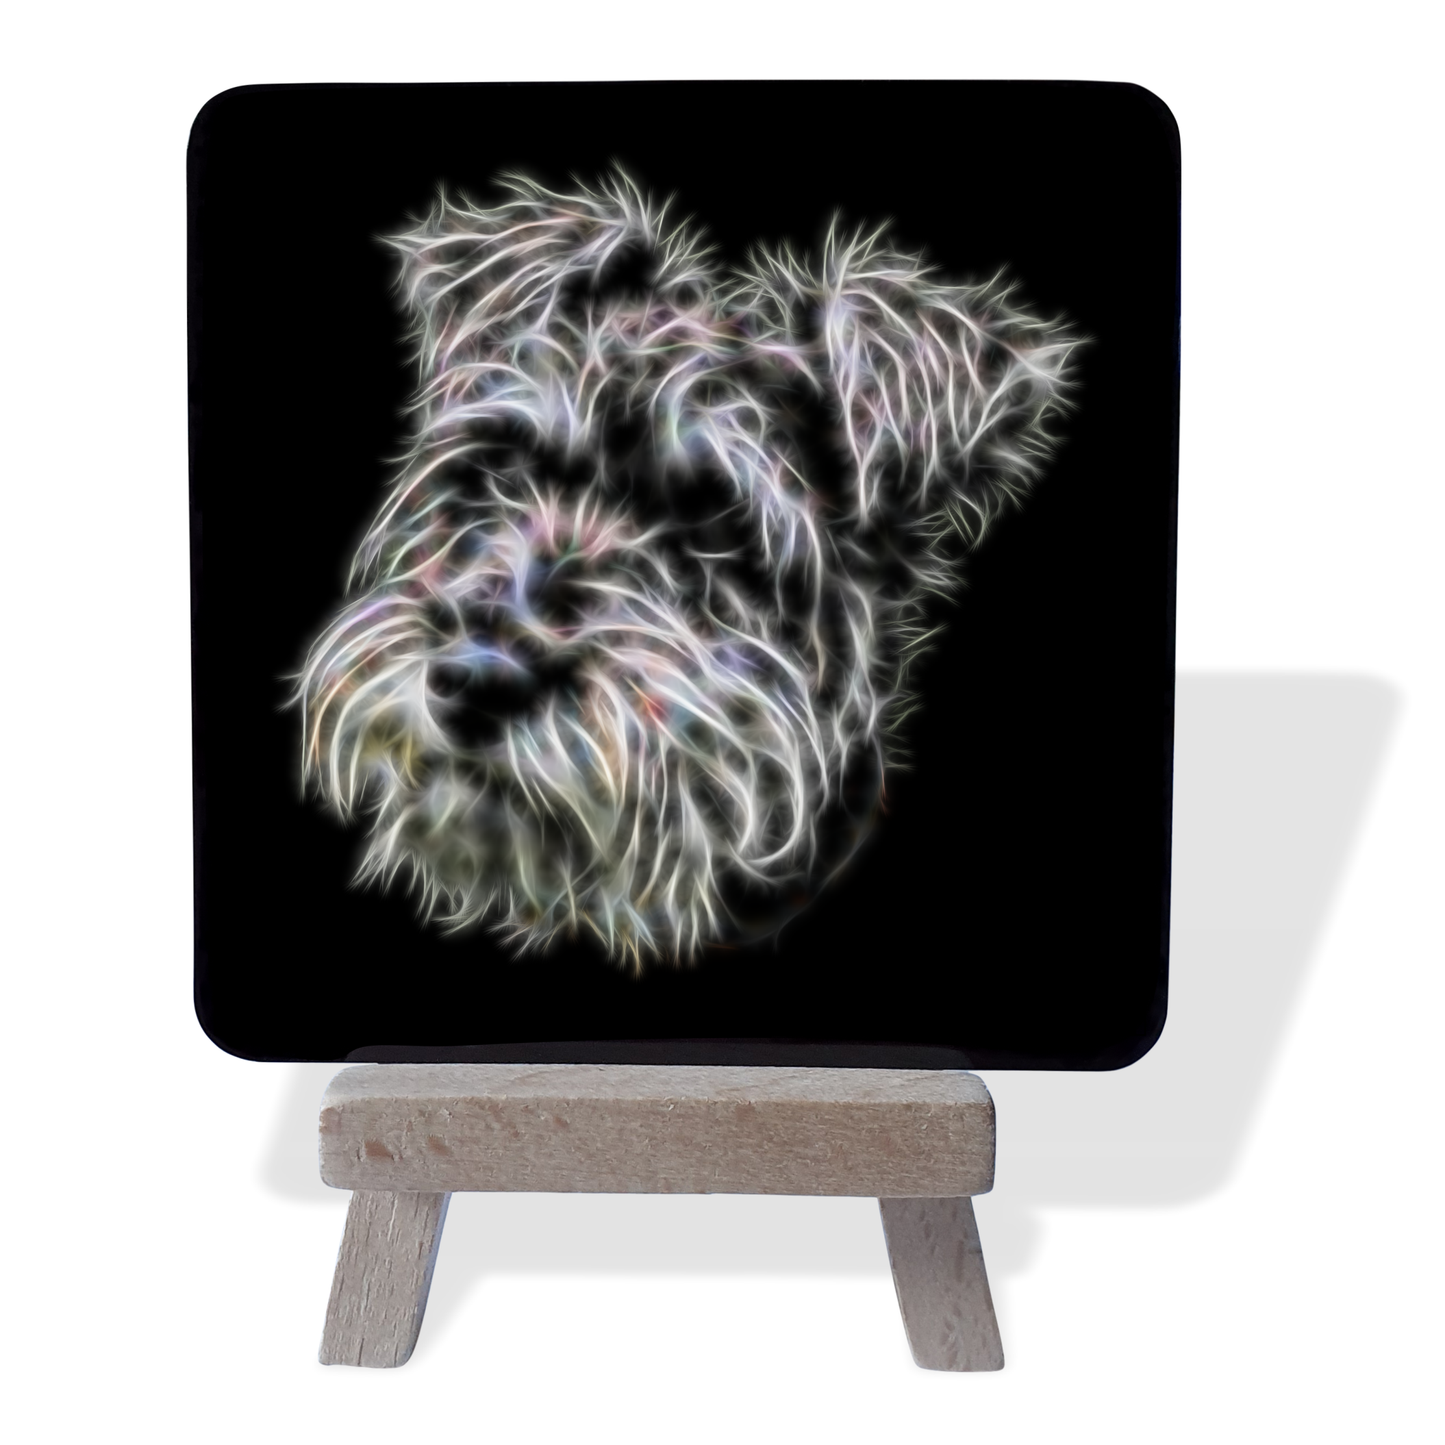 Schnauzer #2 Metal Plaque and Mini Easel with Fractal Art Design